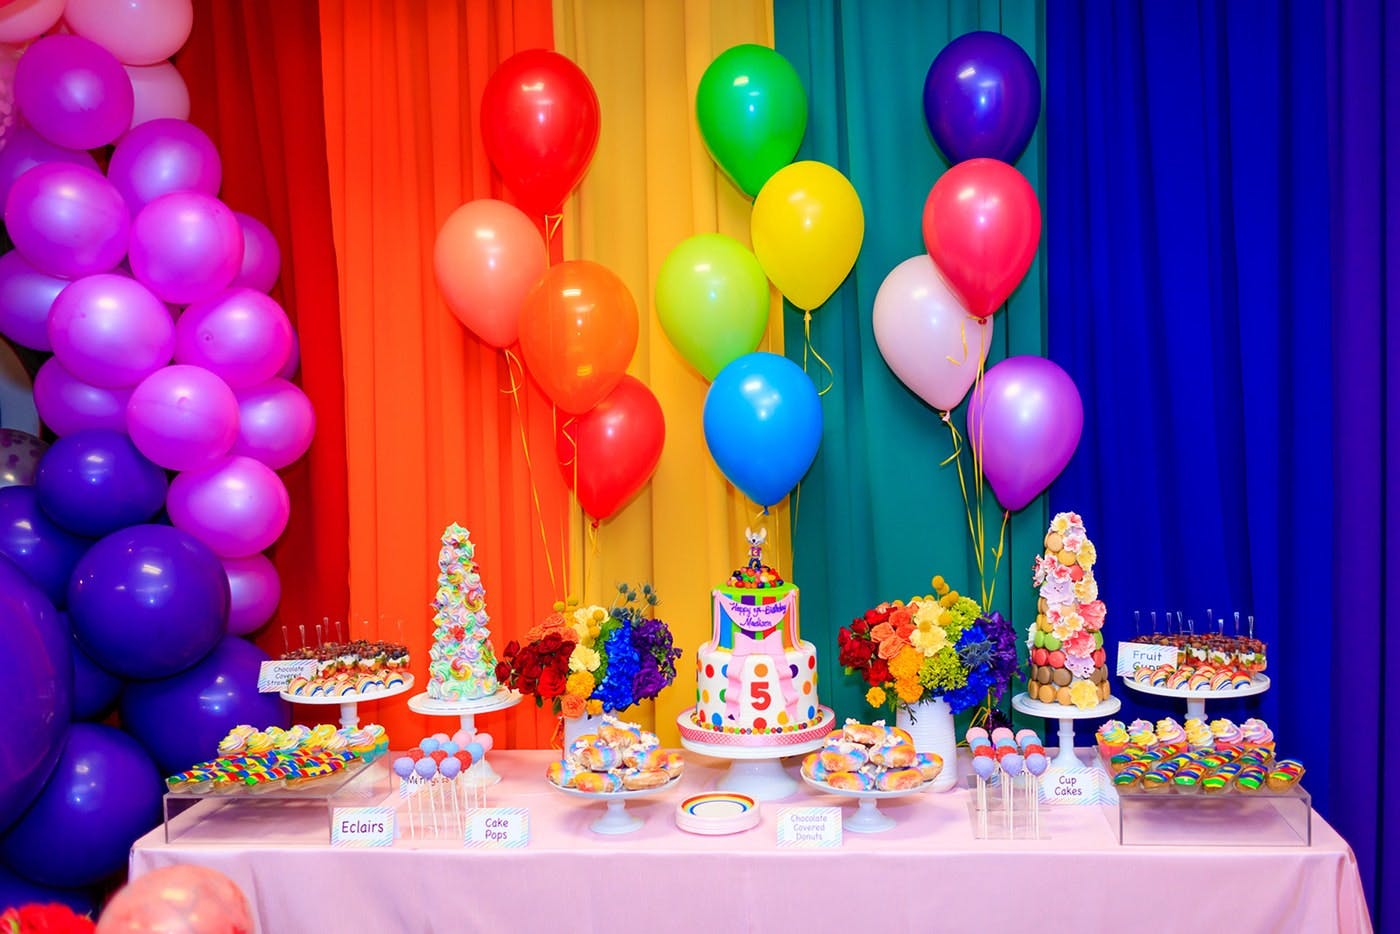 This luxe birthday party design has a classy 70s theme design with